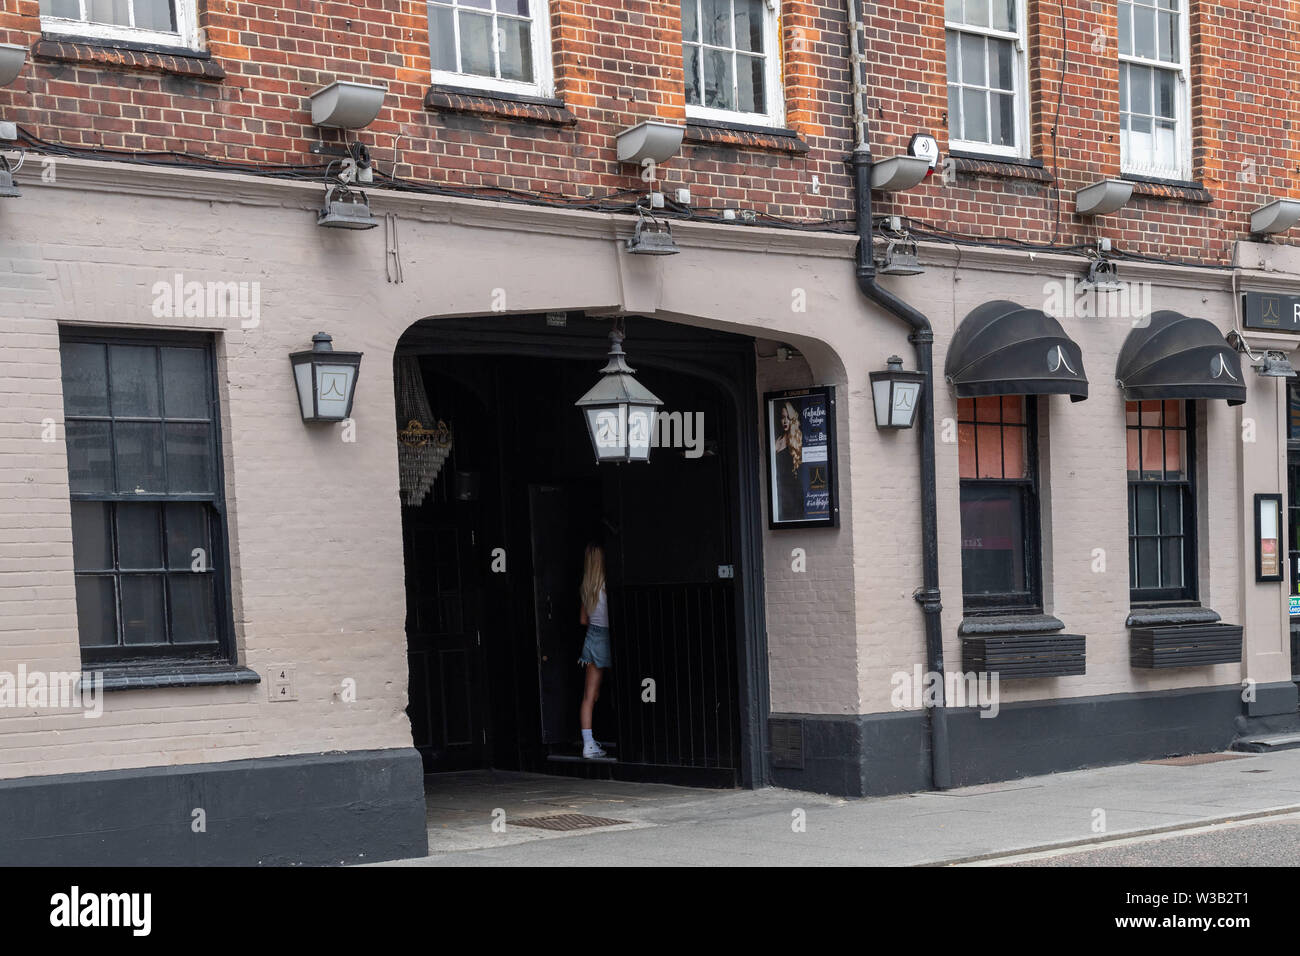 The Sugar Hut, High Street Brentwood Essex.  A well known nightclub and the original home of 'The Only Way is Essex' TOWIE. Stock Photo